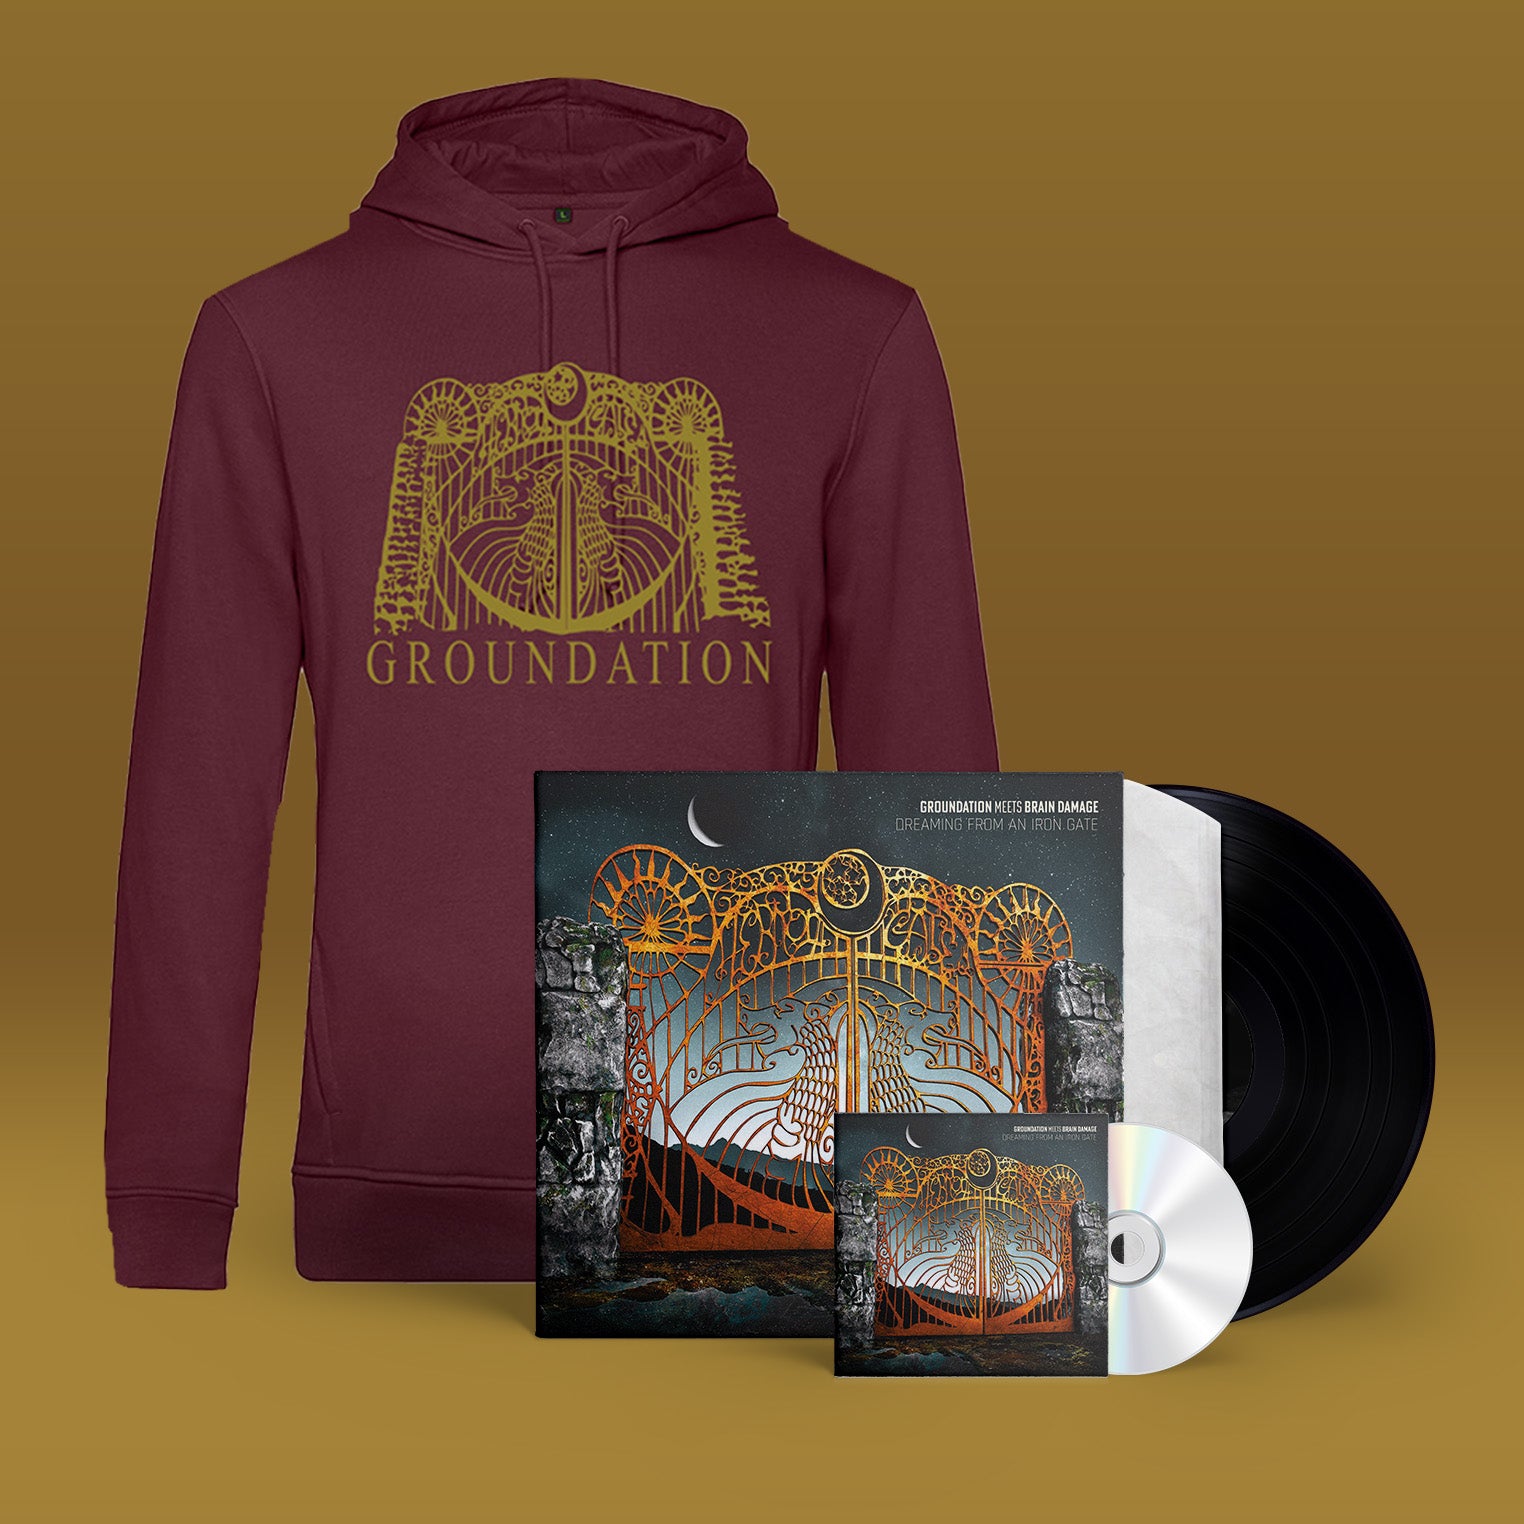 Groundation - Pack sweat + album Dreaming from an Iron Gate